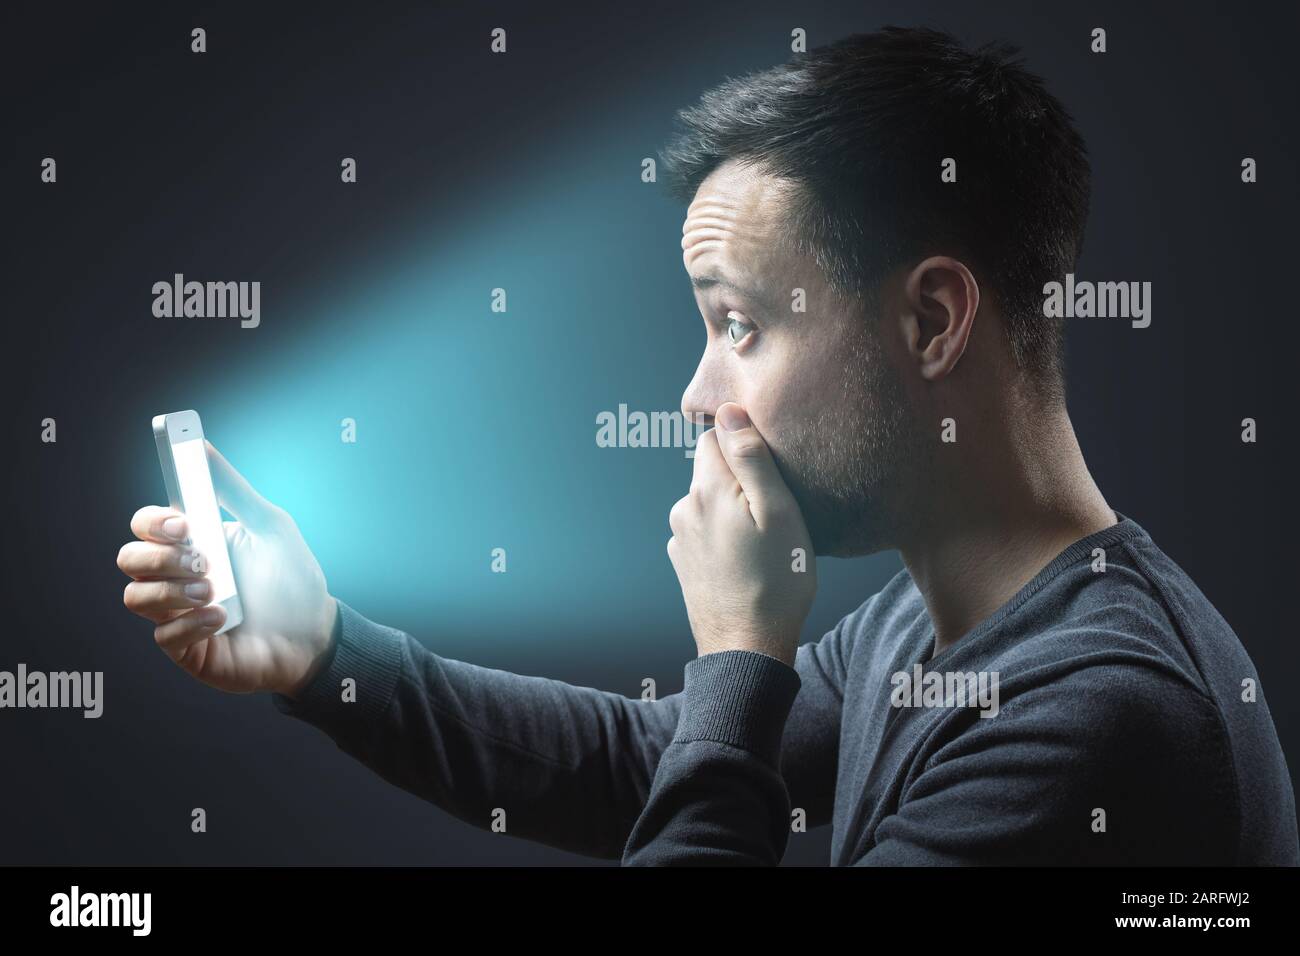 Appalled man looking at his glowing smartphone screen Stock Photo